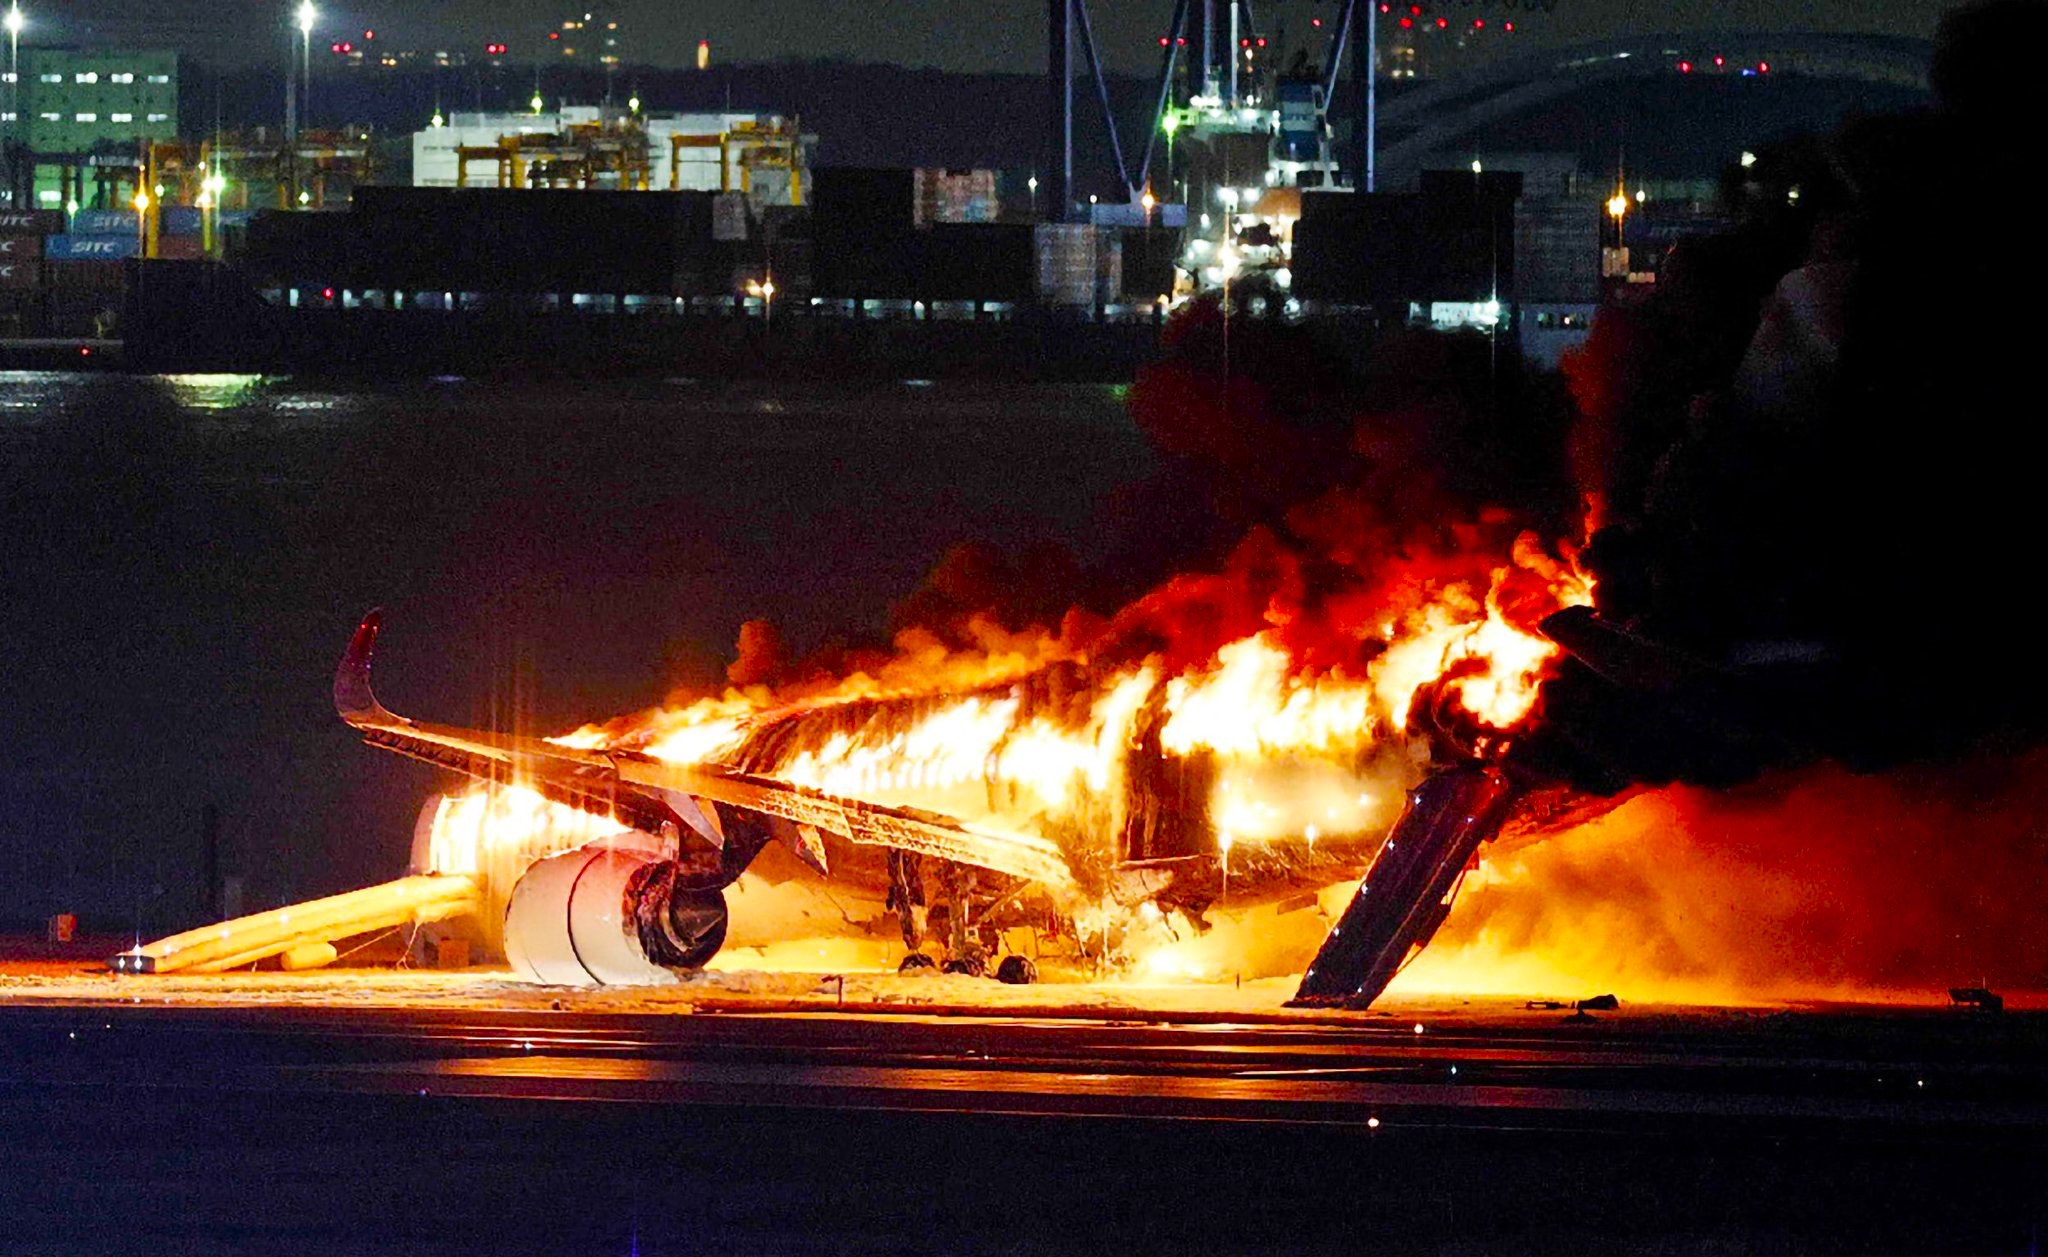 ‘Miracle Escape of 379 People' in Haneda Airport Accident : JAL Awarded 'Richard Crane Award' For Aviation Safety.